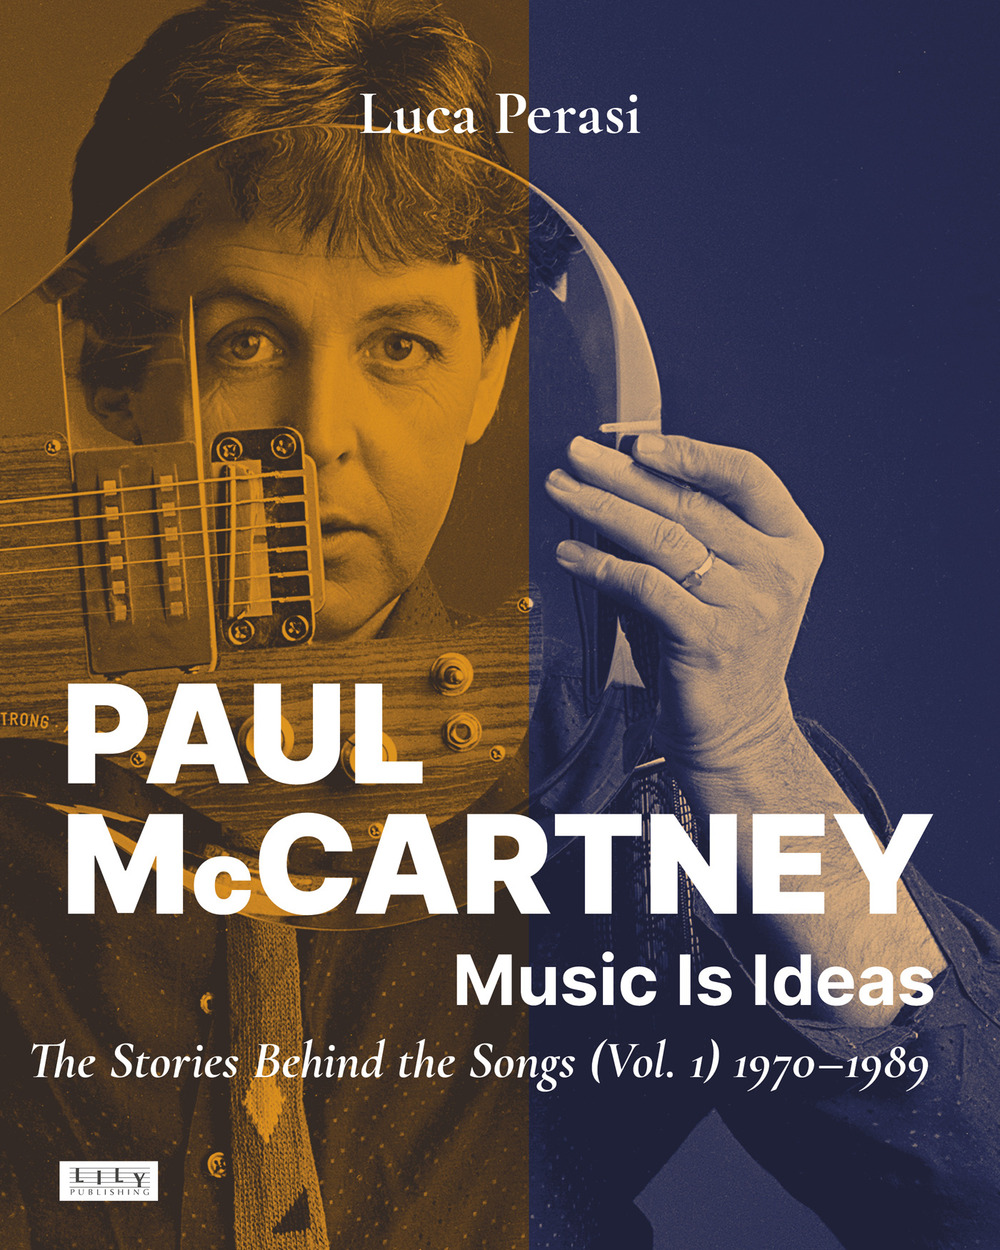 Paul McCartney: music is ideas. The stories behind the songs. Vol. 1: 1970-1989